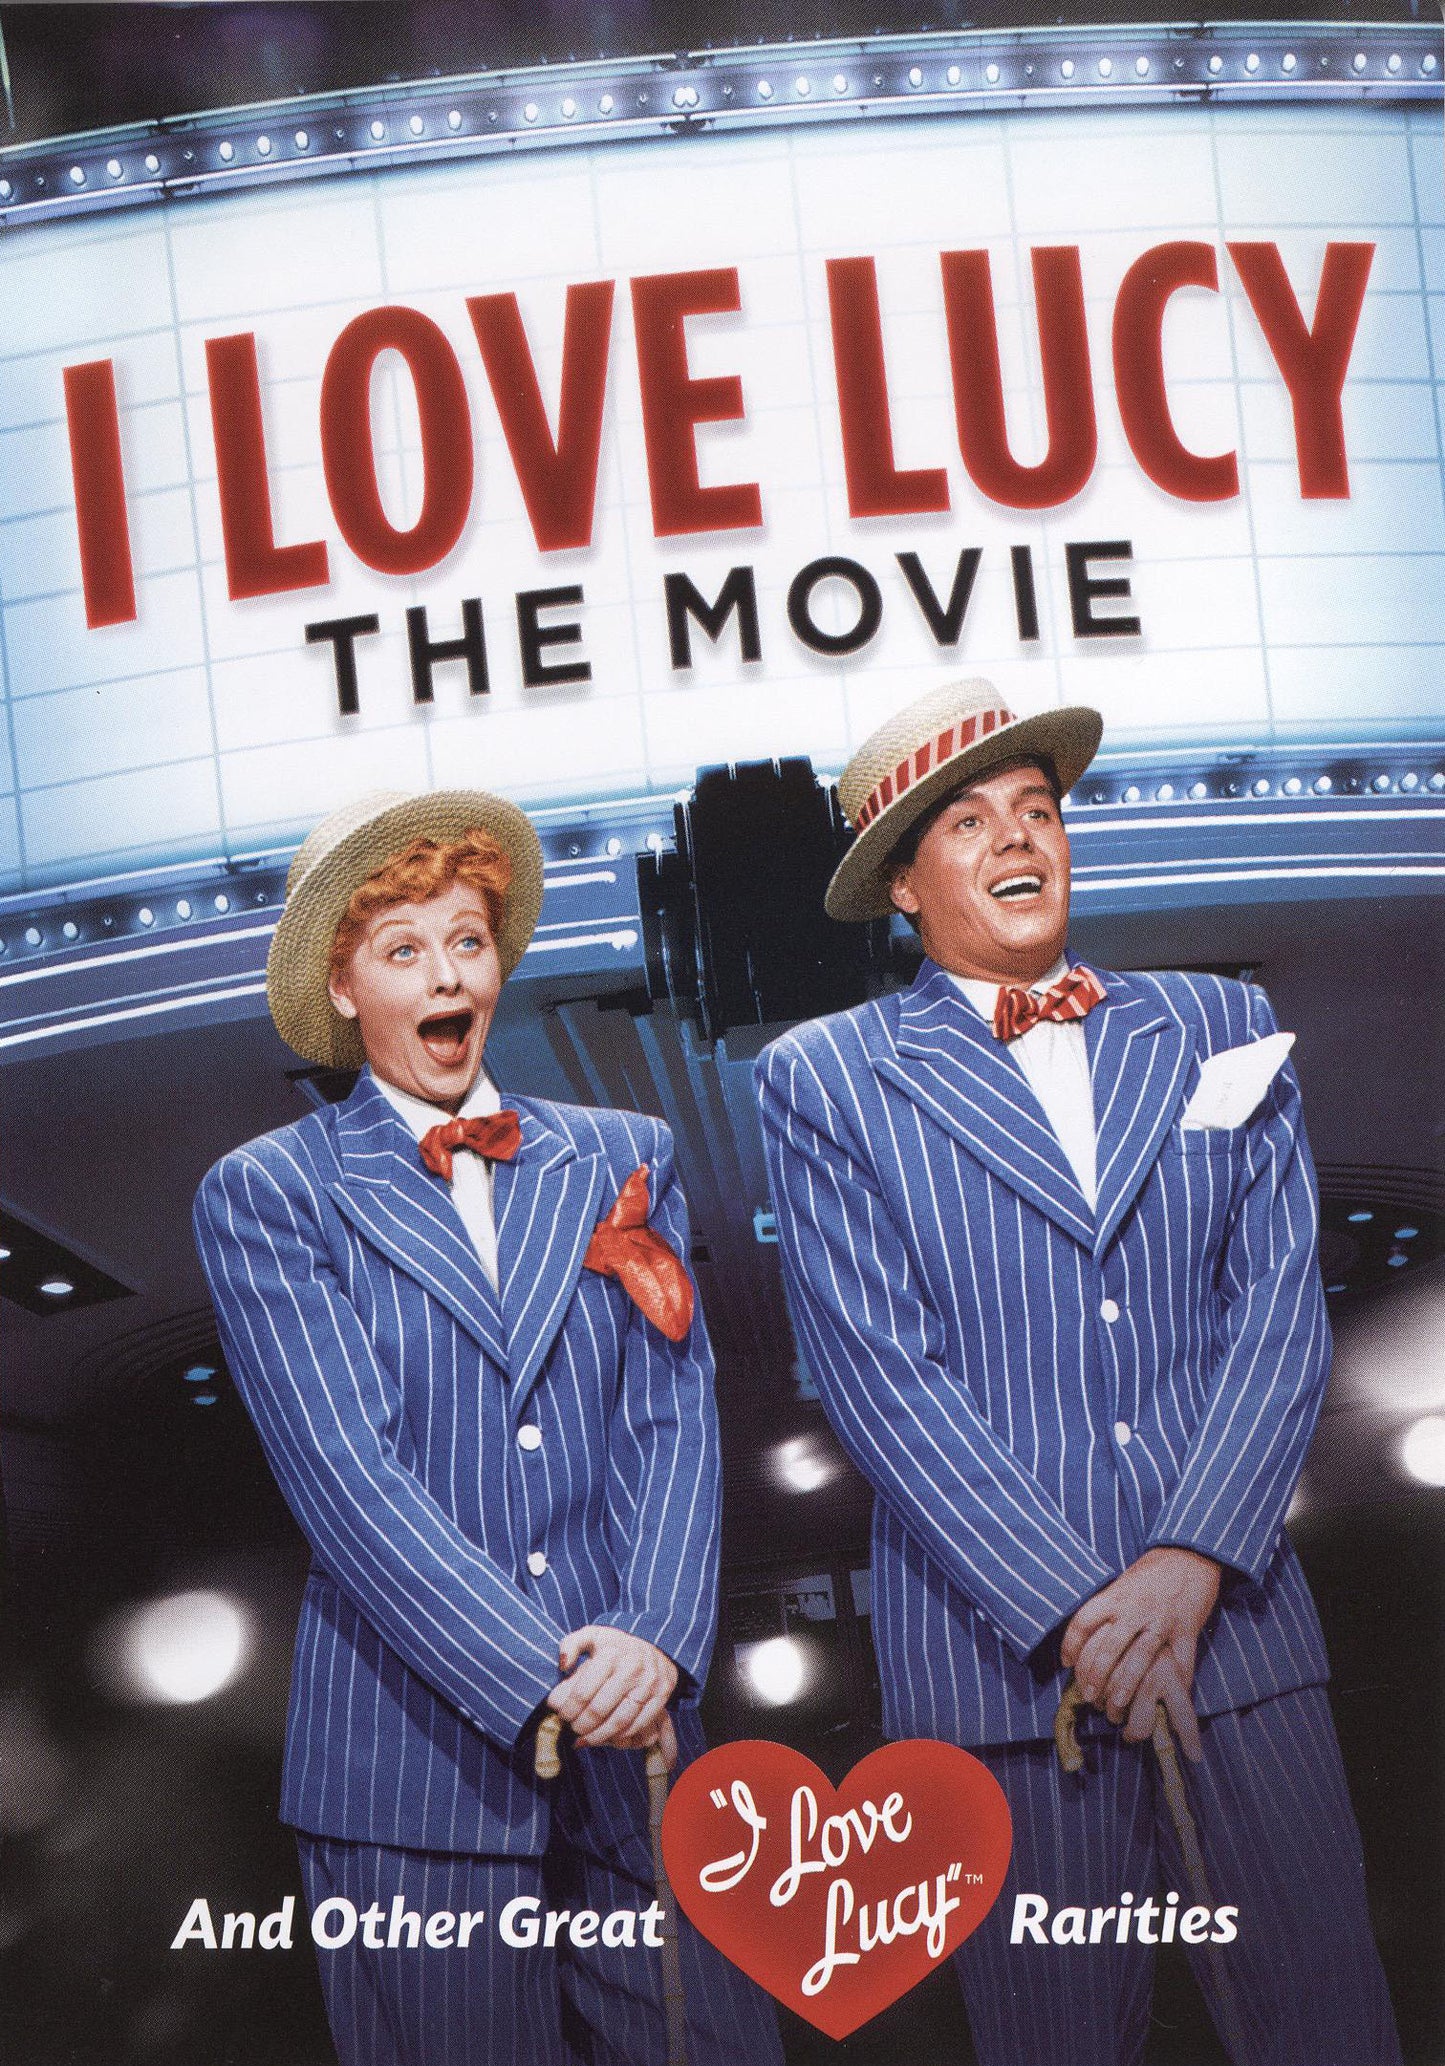 I Love Lucy: The Movie and Other Great Rarities cover art